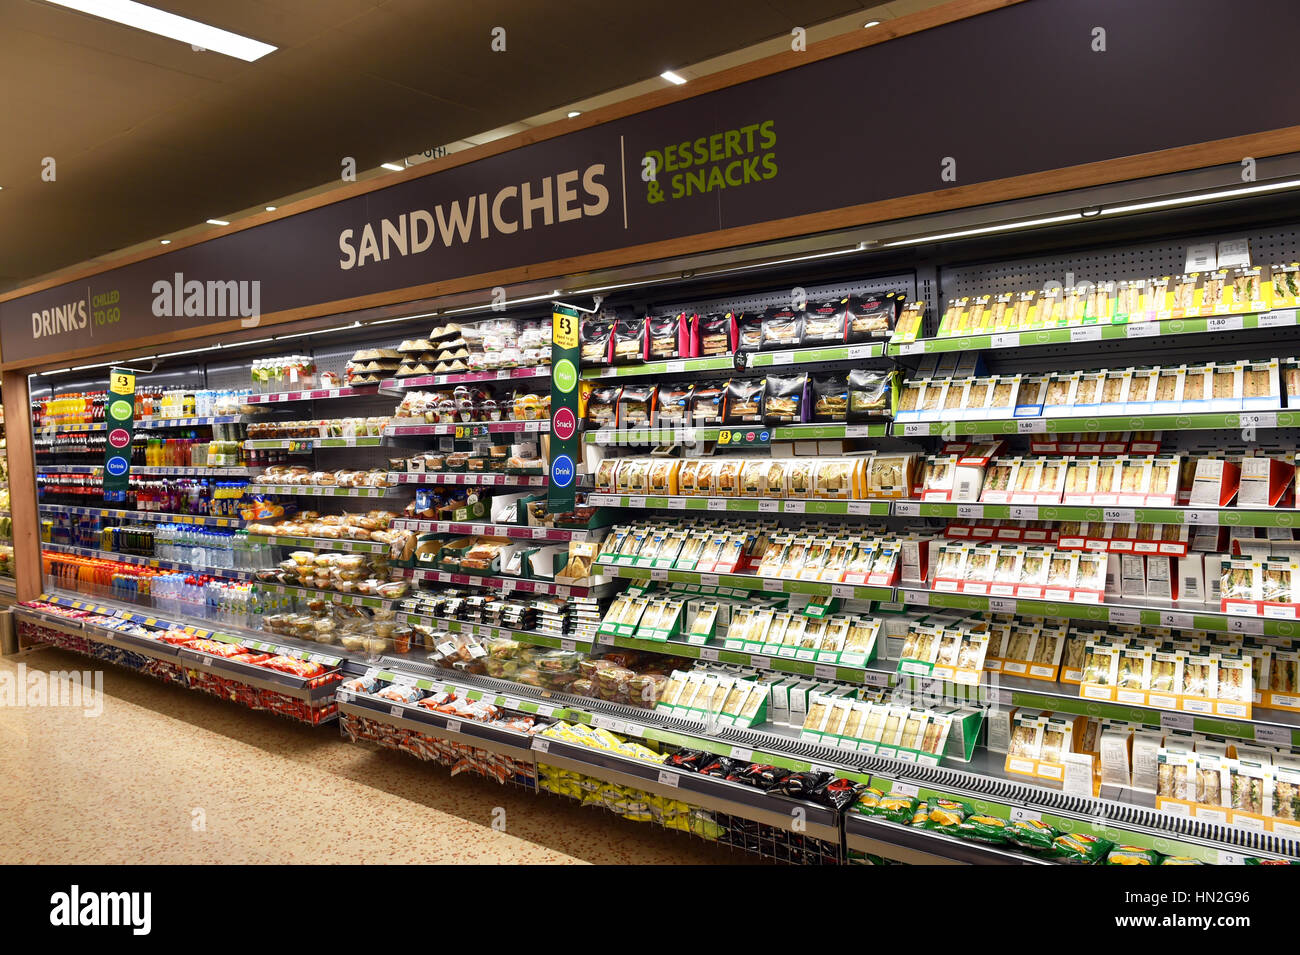 Sandwiches and lunch snacks on display in Morrisons supermarket UK Stock Photo